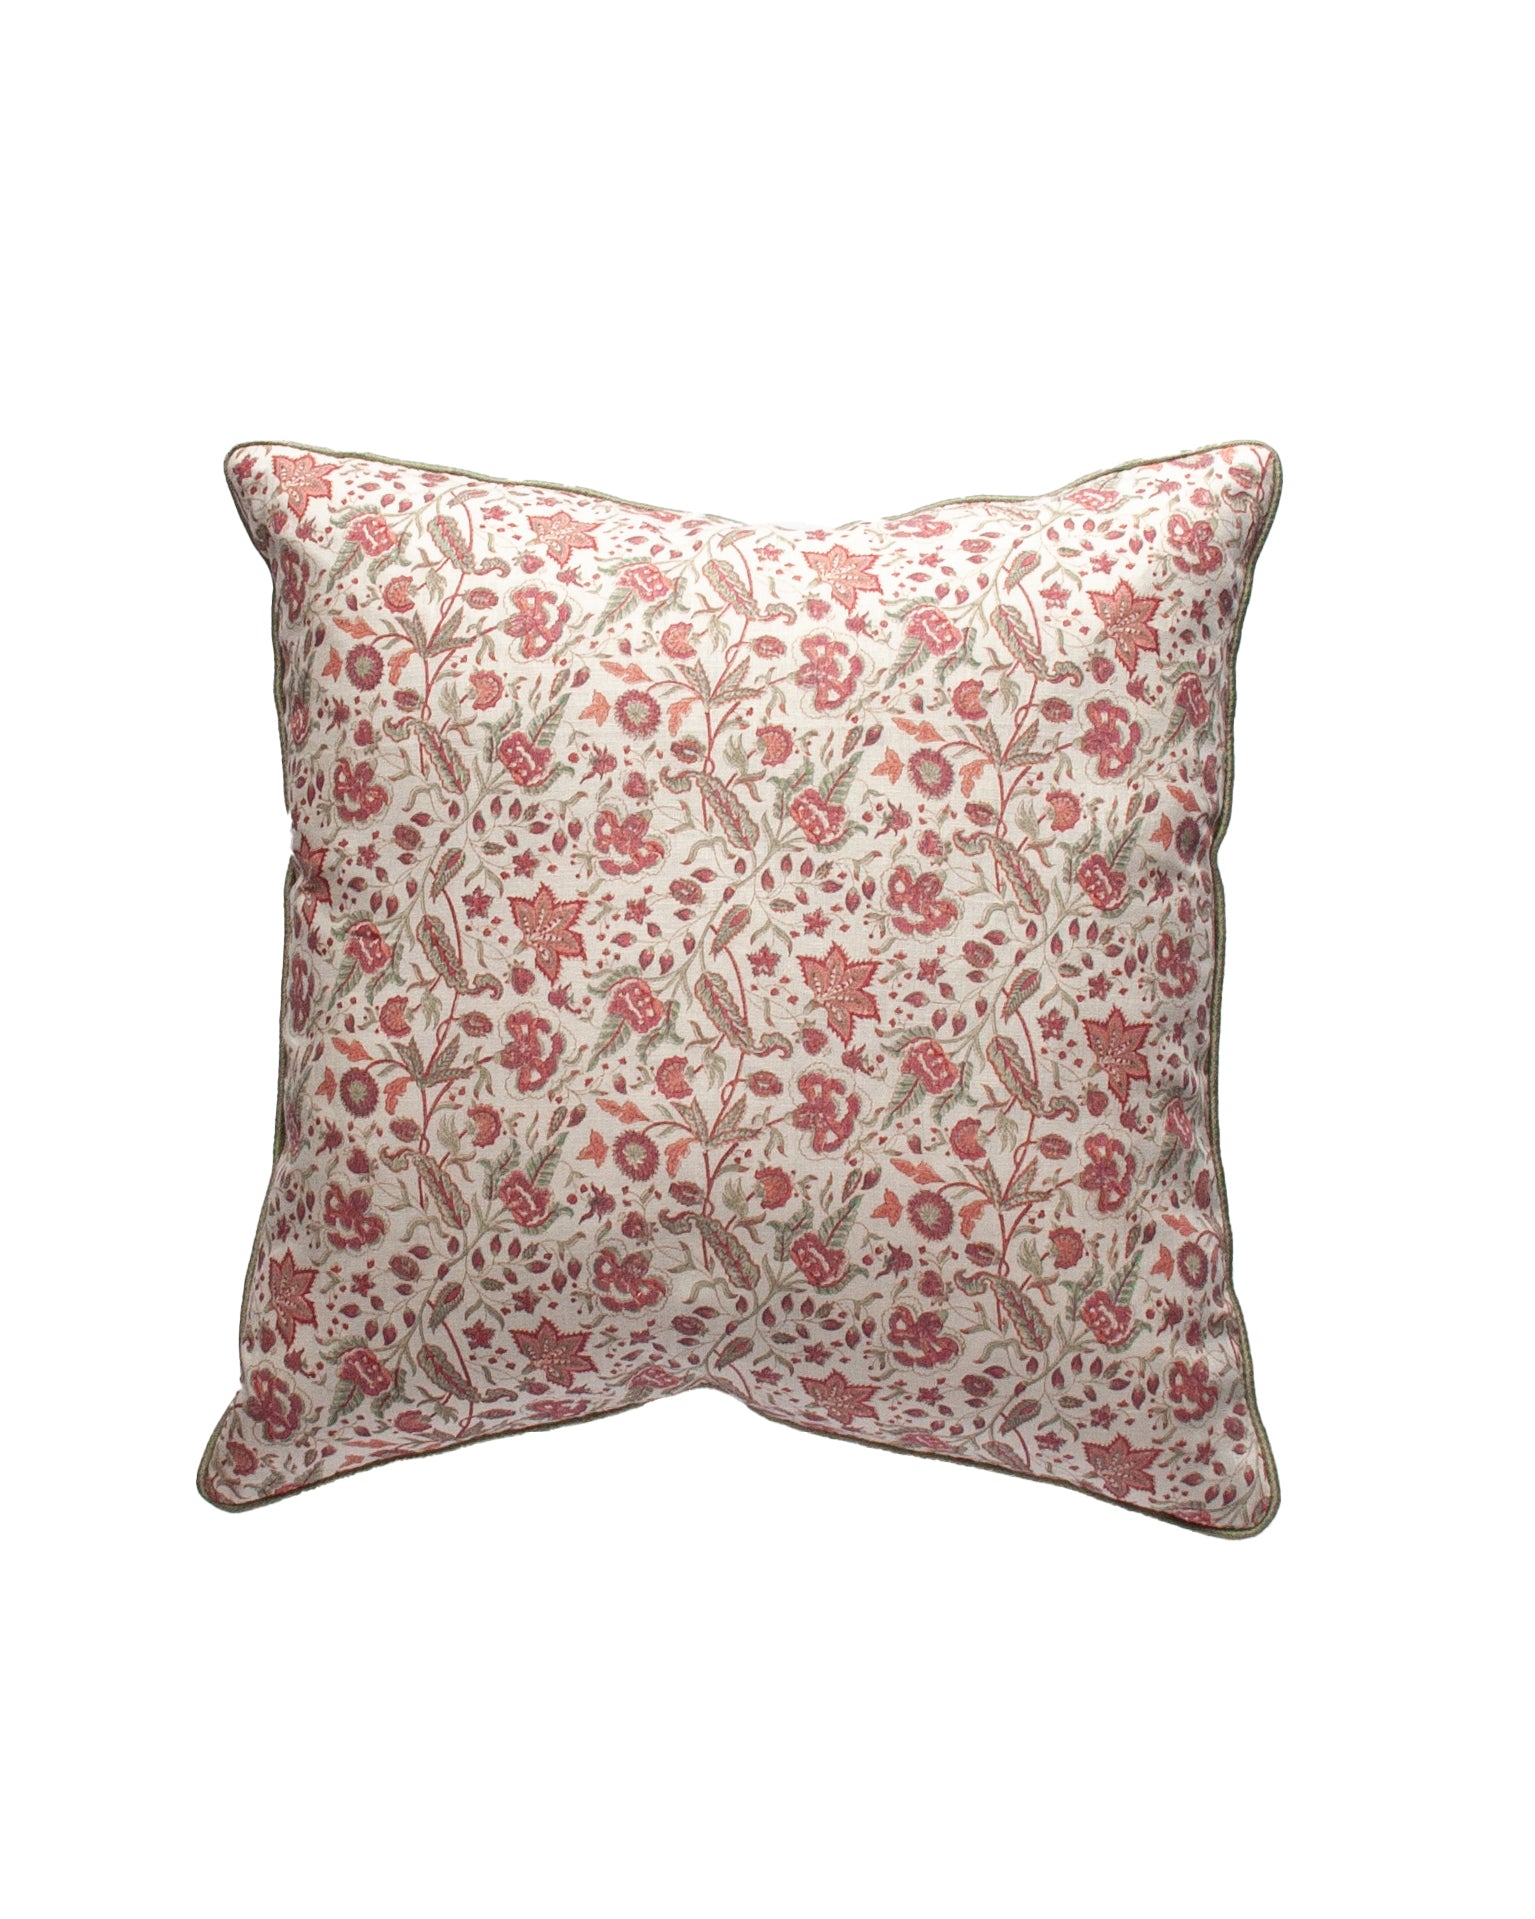 The Finley Square Cushion